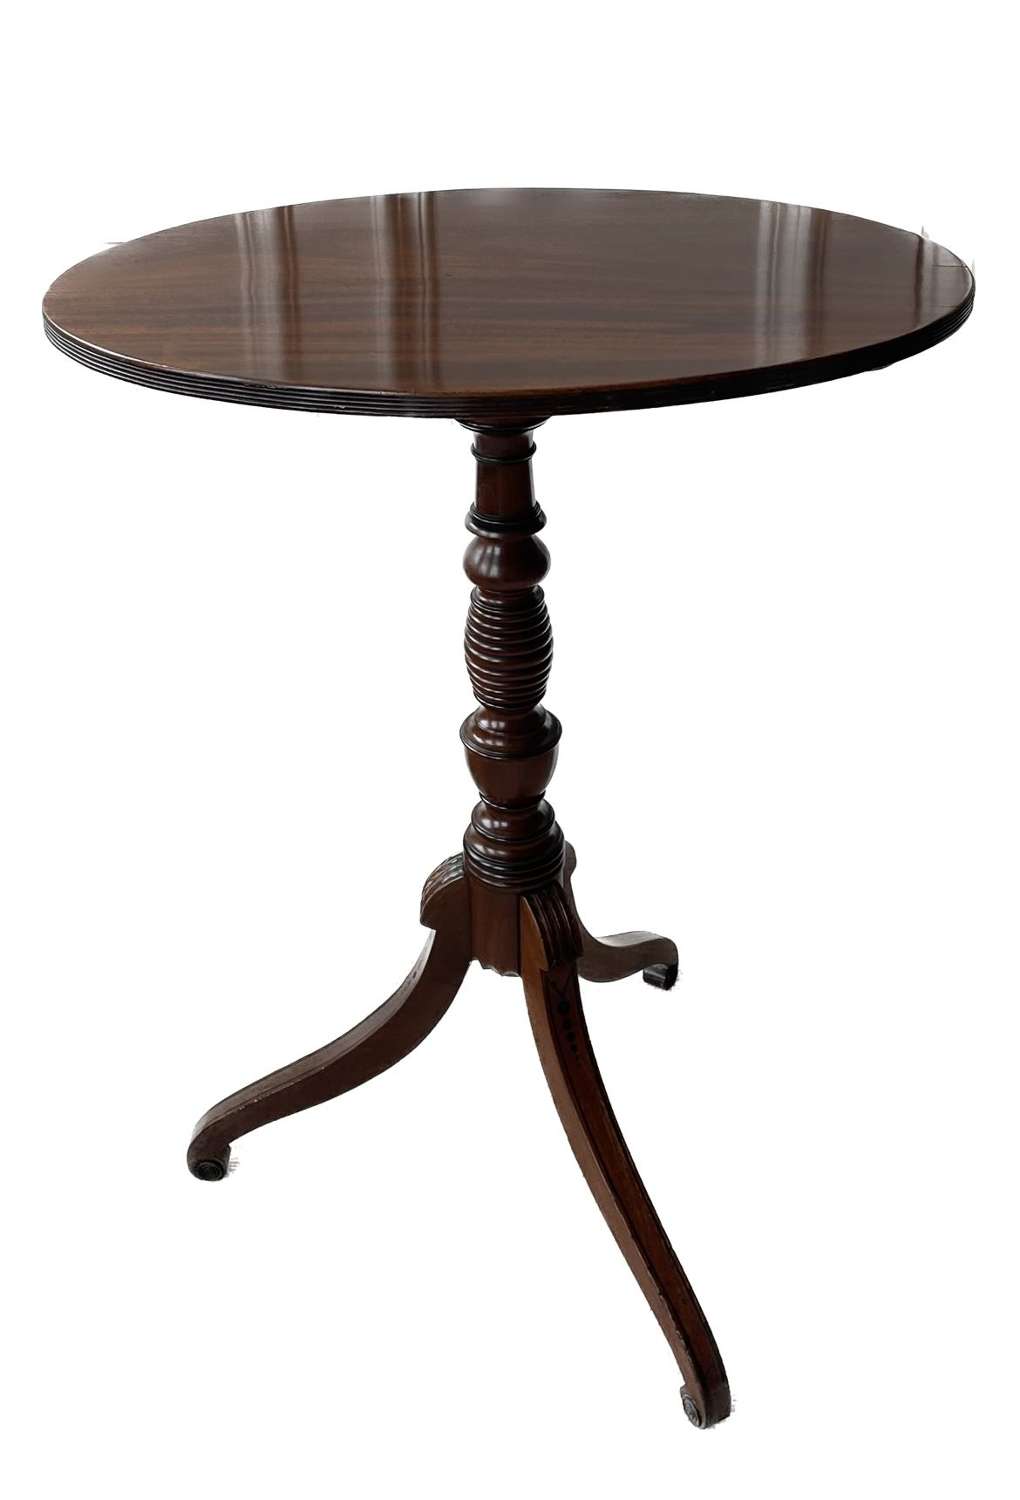 A Scottish Regency occasional table